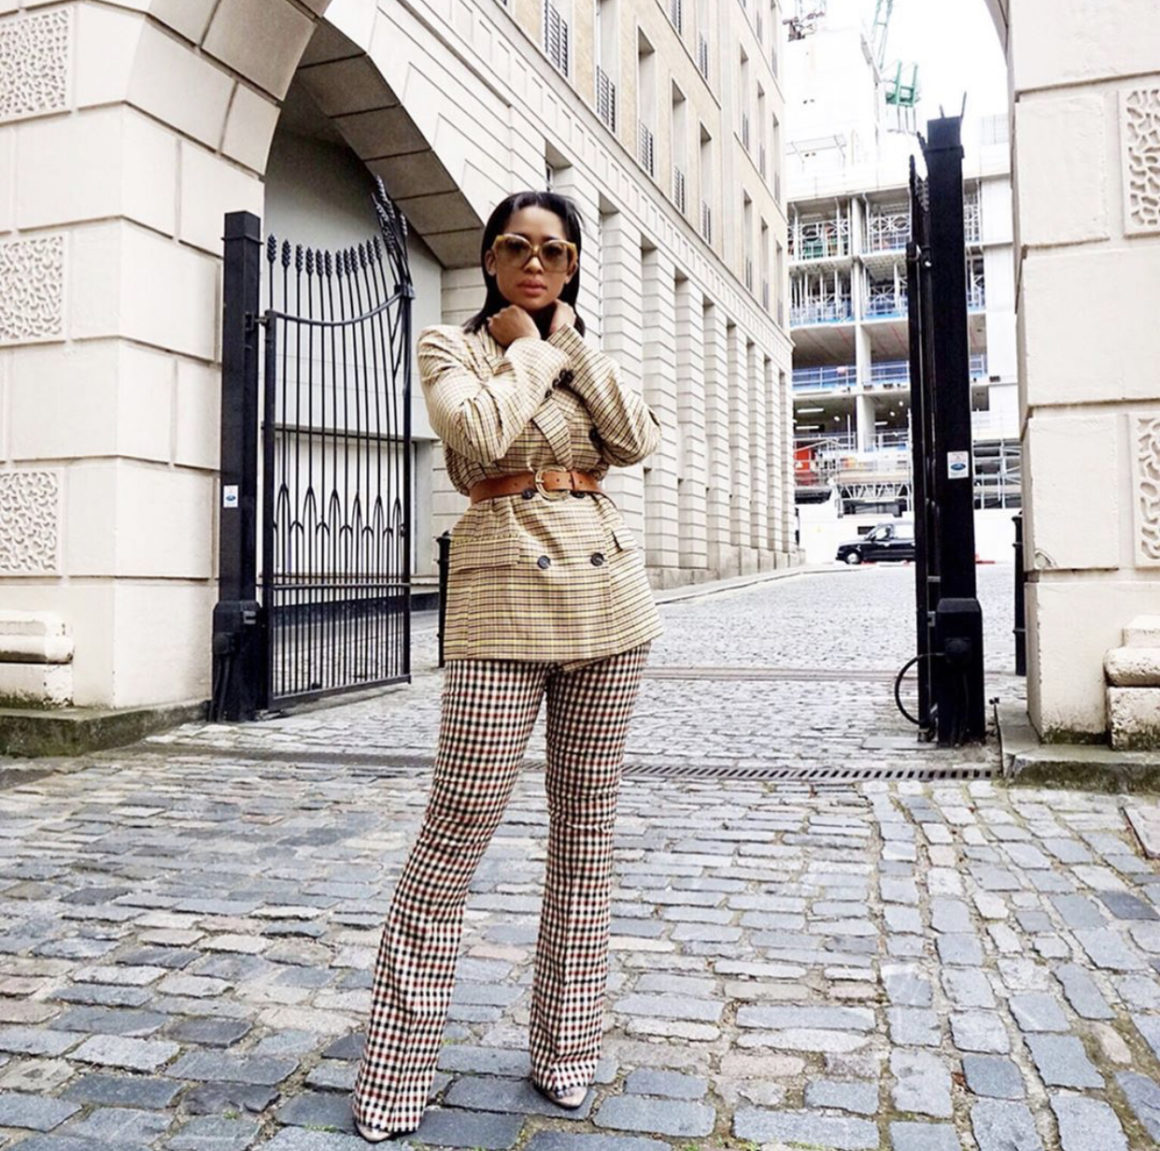 Fashion Bombshell of the Day: Jerolyne from the London – Fashion Bomb Daily